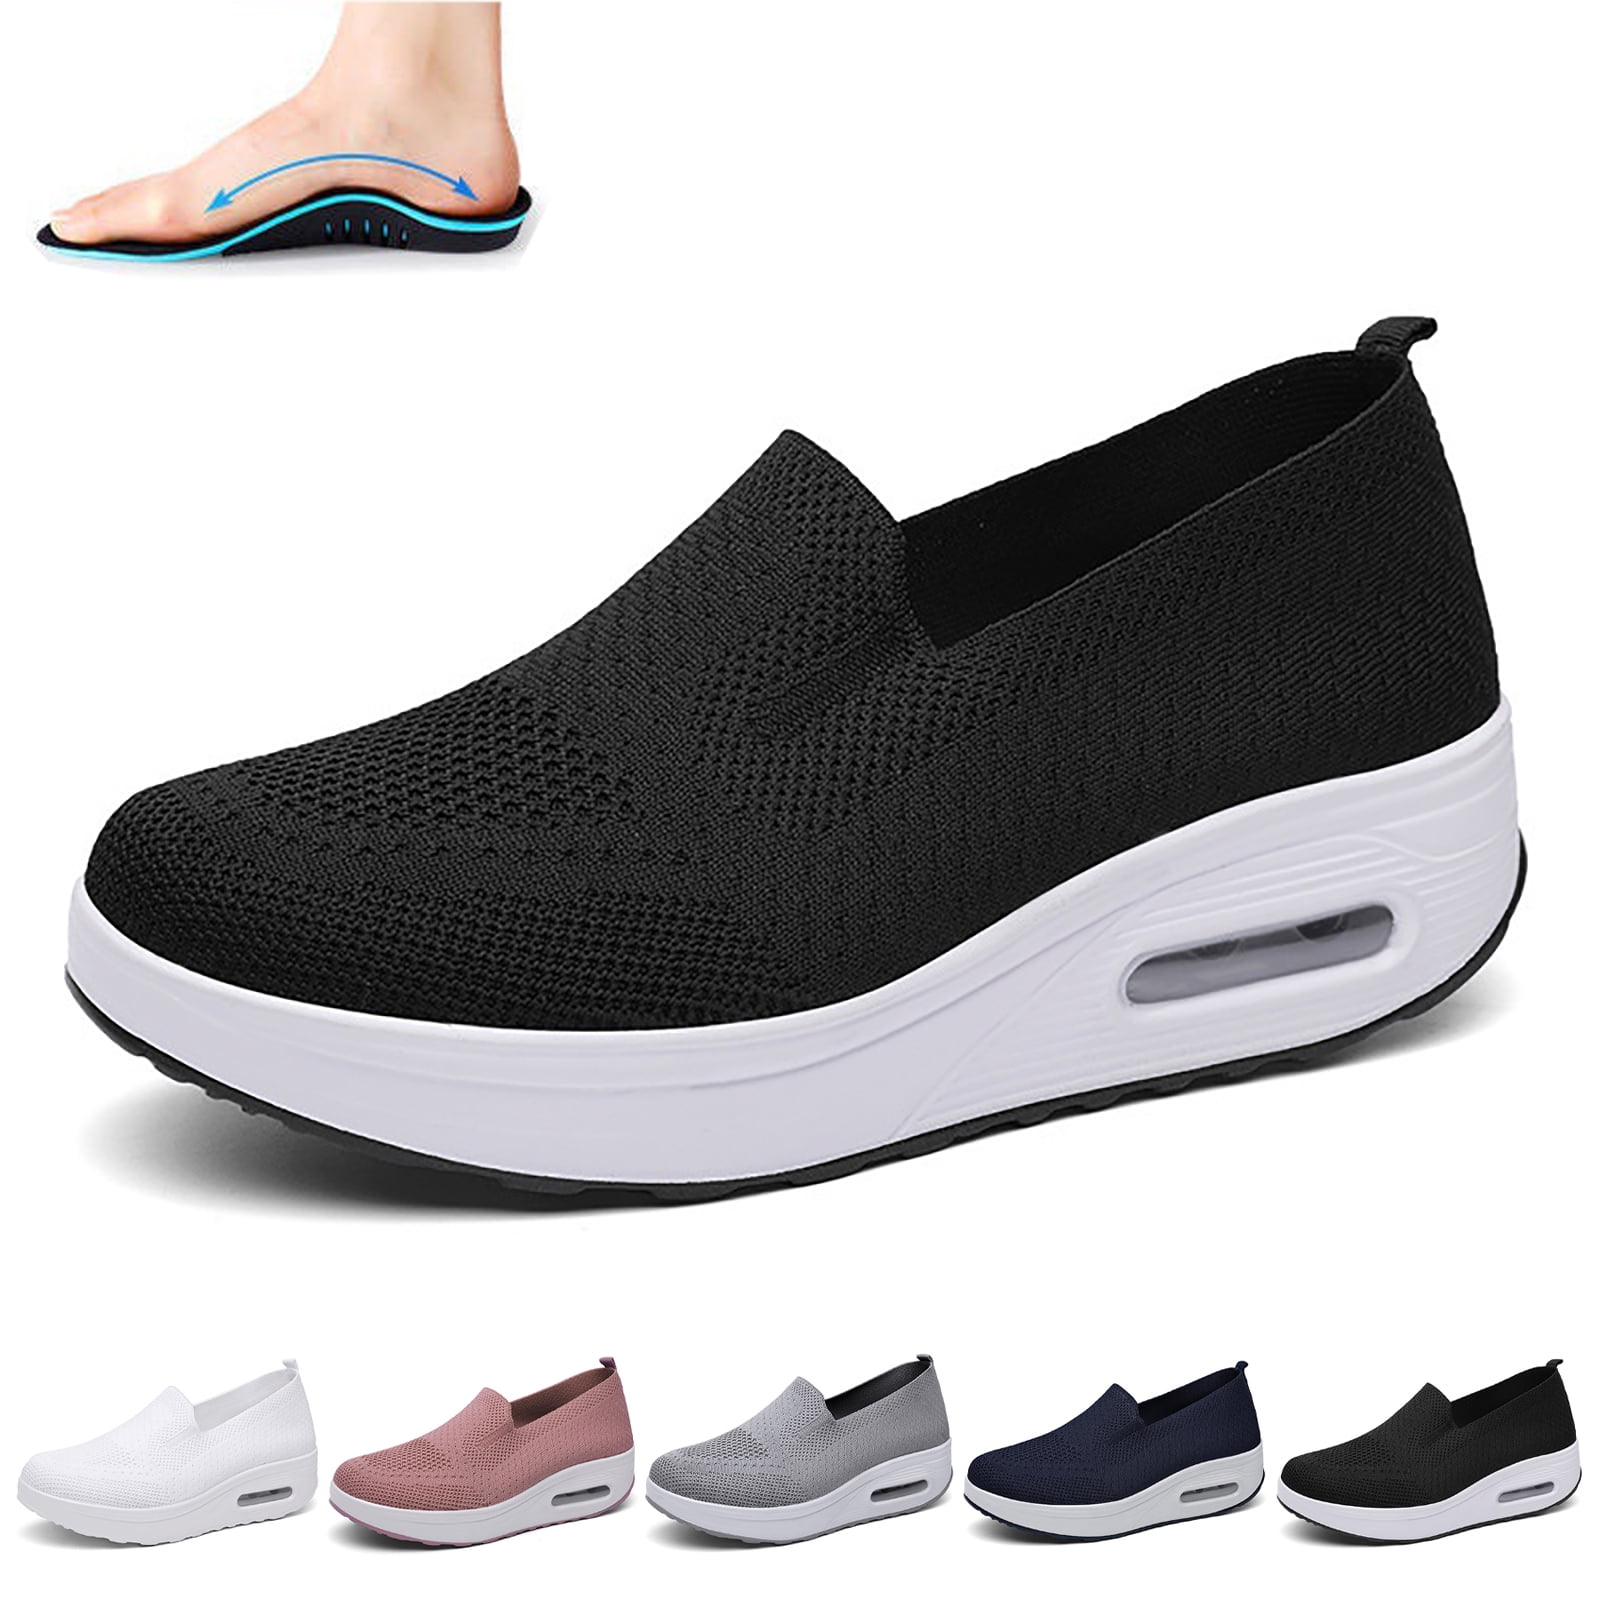 Women's Orthopedic Sneakers Orthopedic Shoes for Women Mesh Up Stretch ...